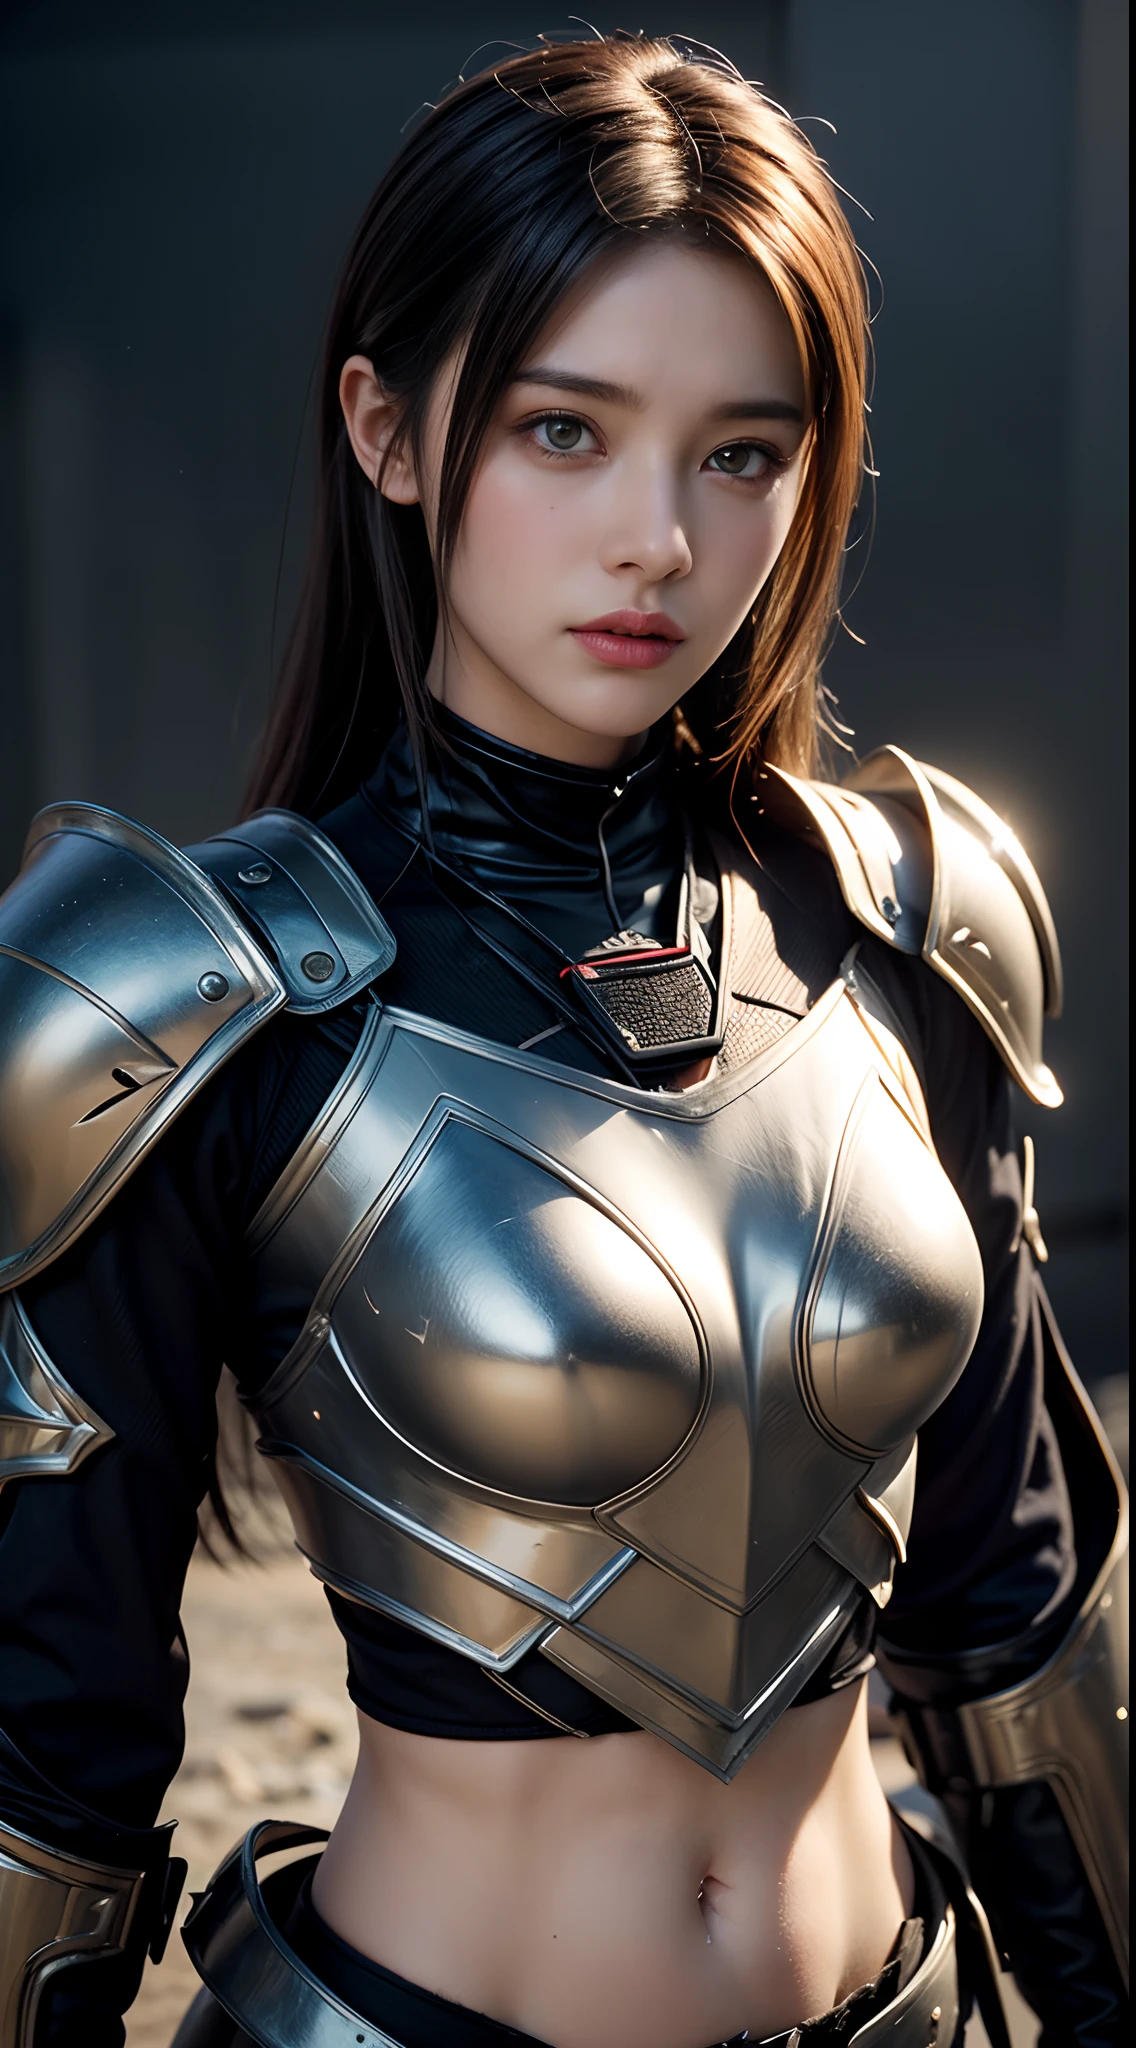 ((top-quality)), ((​masterpiece)), (detaileds:1.4),。.。.。.。.。.3D, Beautiful Cyberpunk Woman Image,nffsw(HighDynamicRange),Ray traching,NVIDIA RTX,Hyper-Resolution,Unreal 5,Sub-surface scattering,PBR Texturing,Postprocess,Anisotropy Filtering,depth of fields,Maximum clarity and sharpness,multi-layer texture,Albedo and specular maps,Surface Shading,Accurate simulation of light-material interactions,perfectly proportions,Octane Rendering,Two-tone lighting,Wide aperture,Low ISO、White Balance、thirds rule、8K Raw、(Armor with a black dragon design),(((Clothes and armor are tattered))),(((Clothes are stained with dirt or dust))),((Upper body portrait))